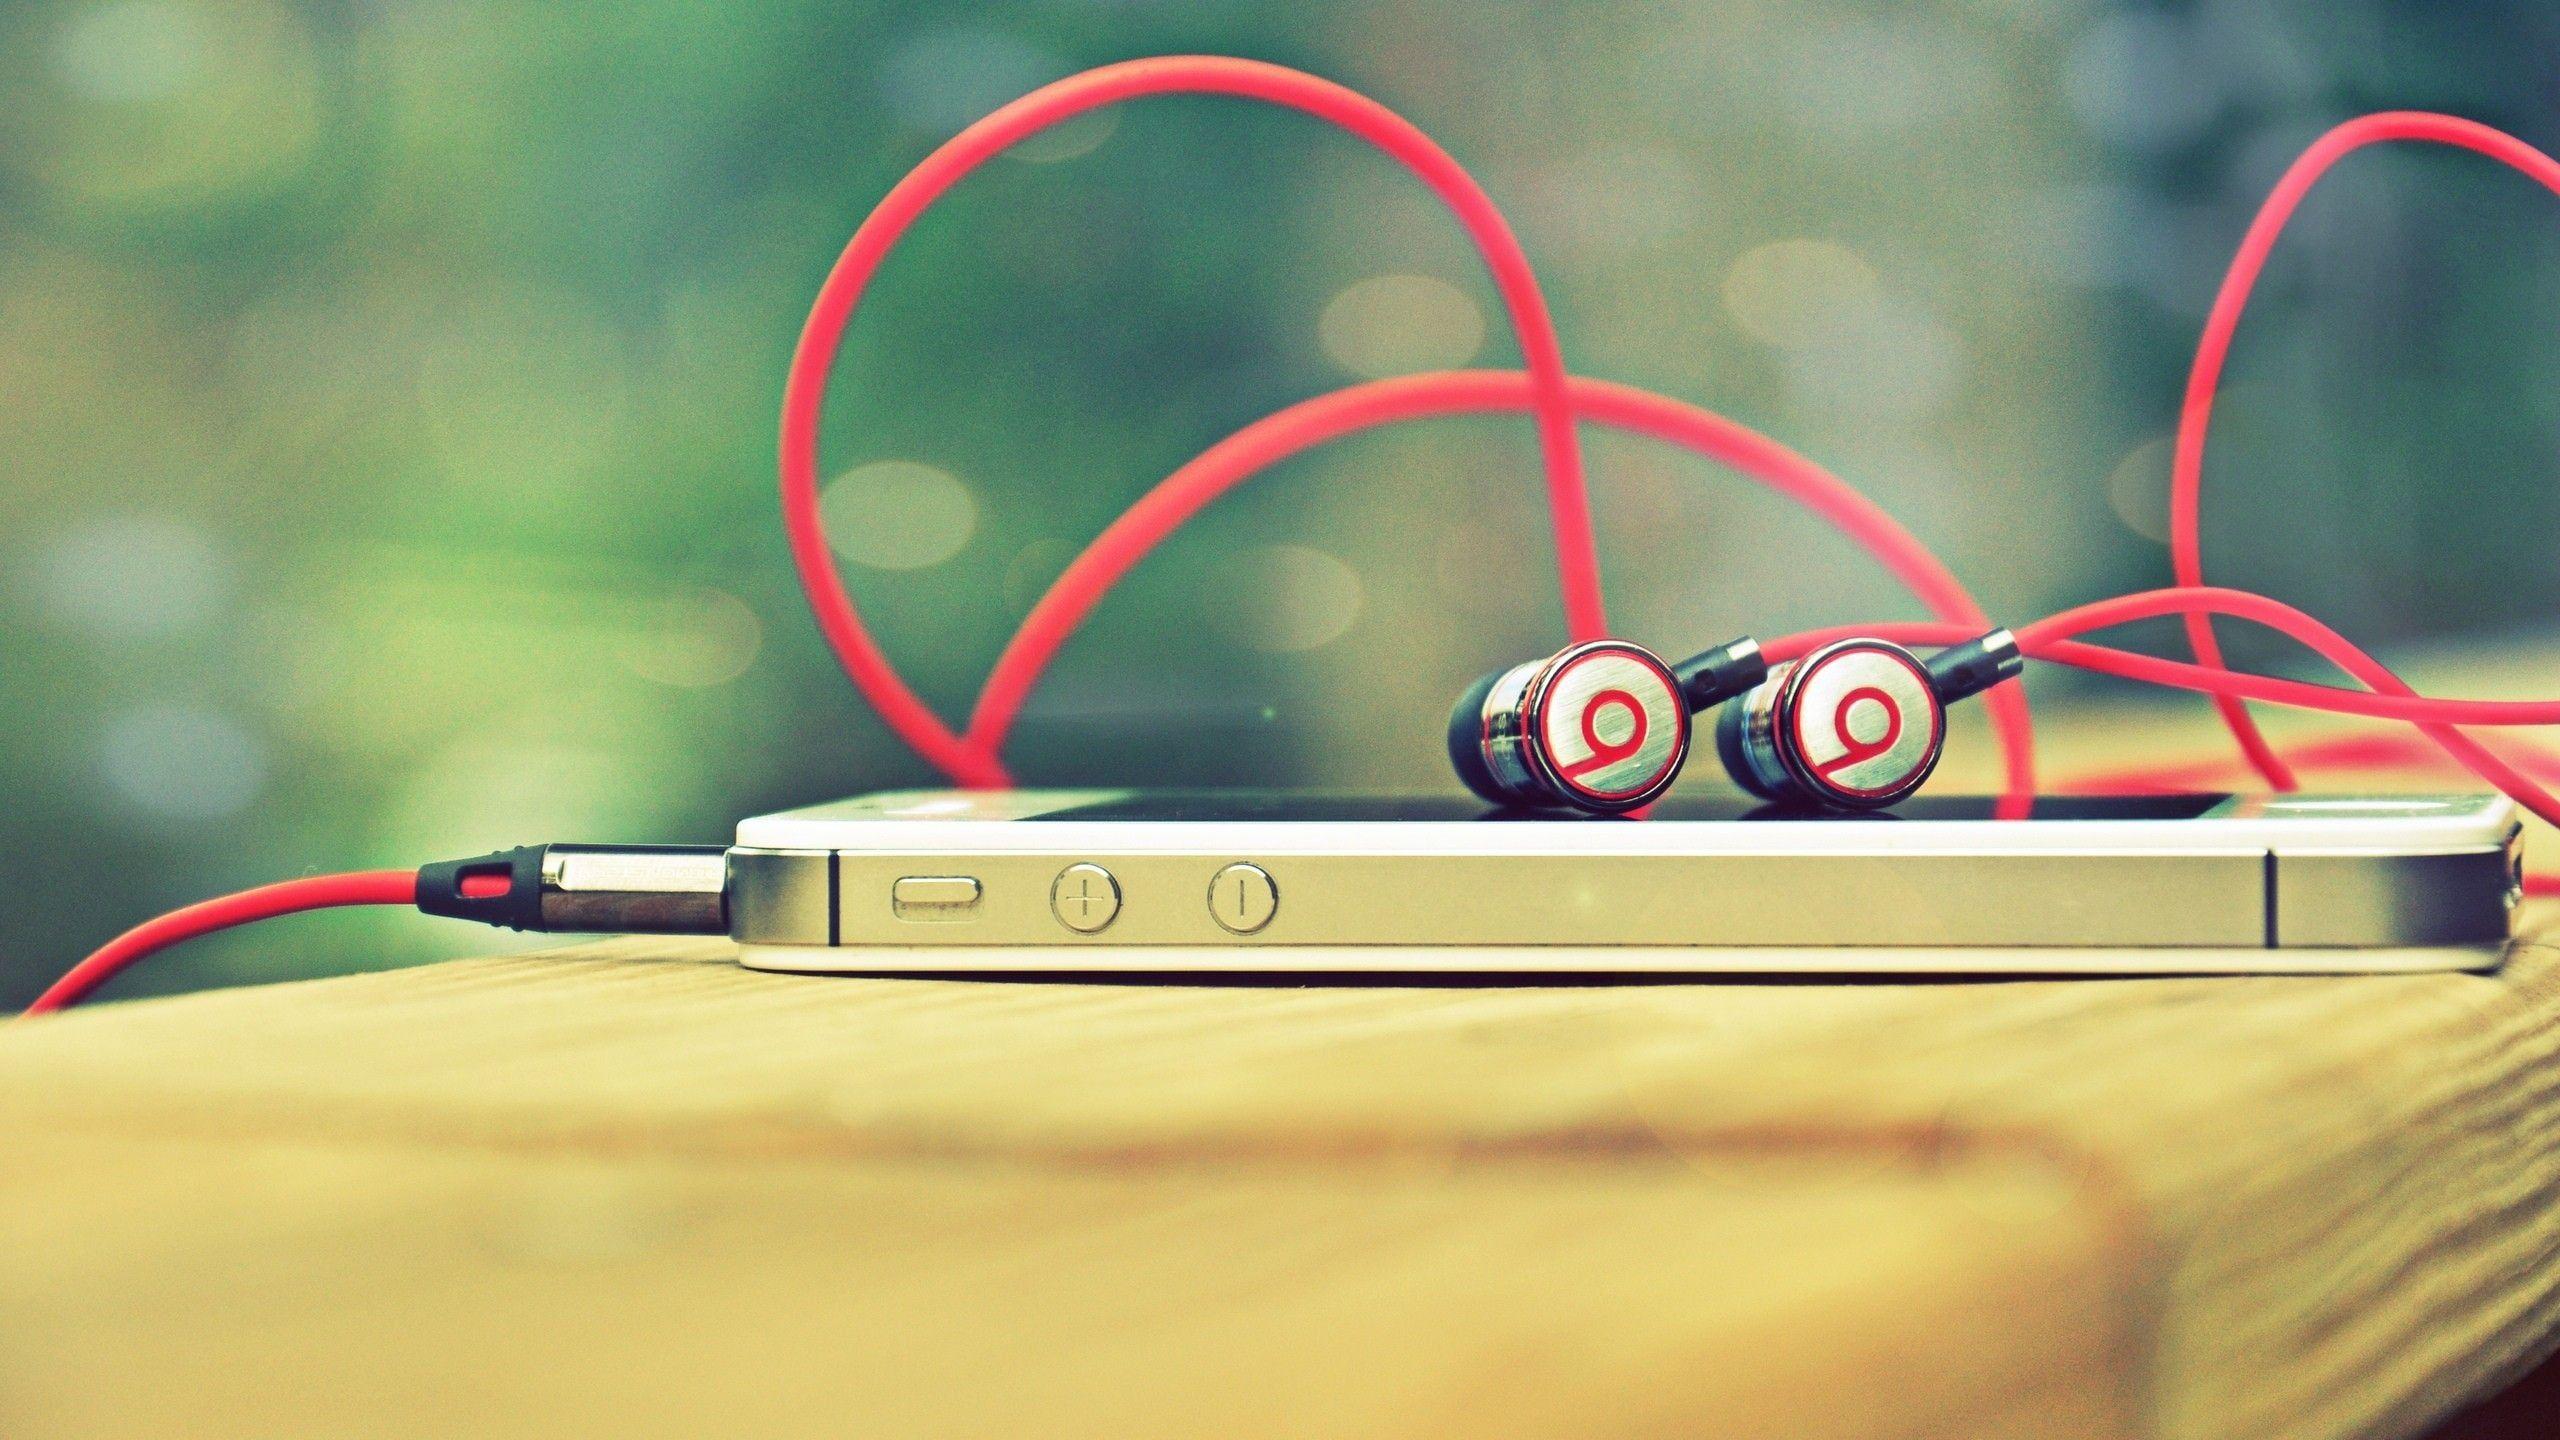 Black and red Beats earphone and white iPhone 4S HD wallpaper